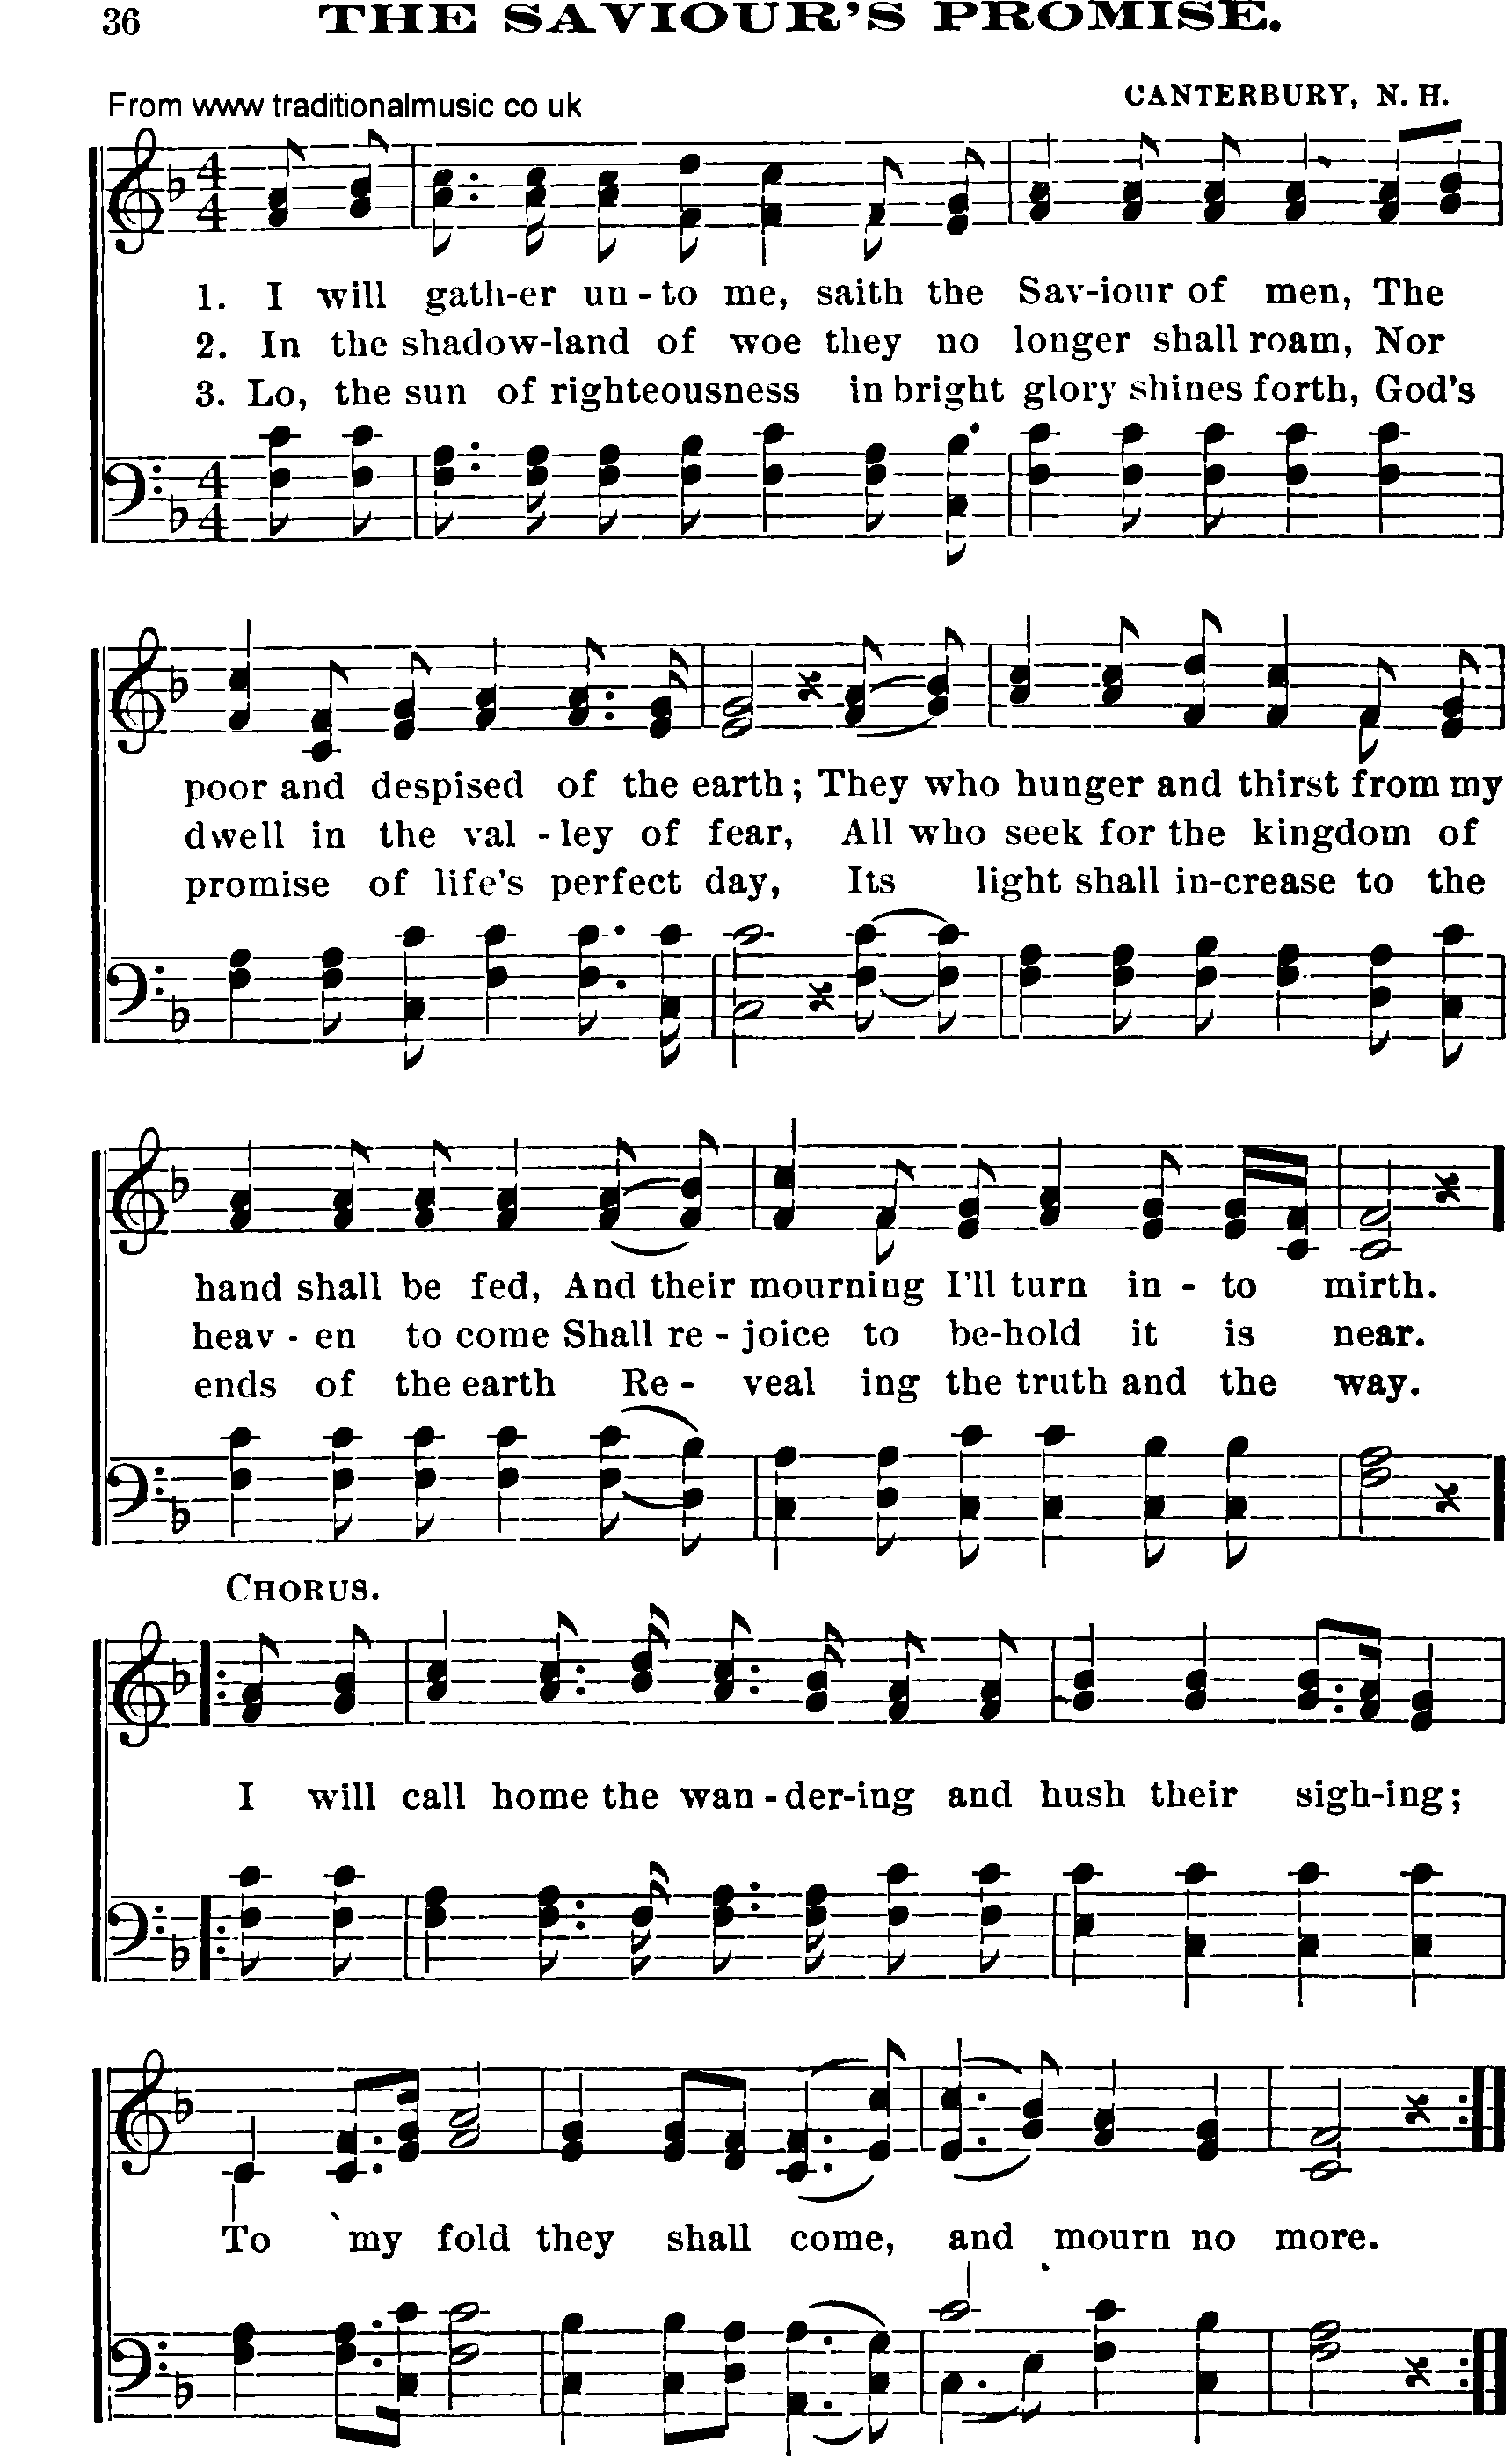 Shaker Music collection, Hymn: the saviours promise, sheetmusic and PDF